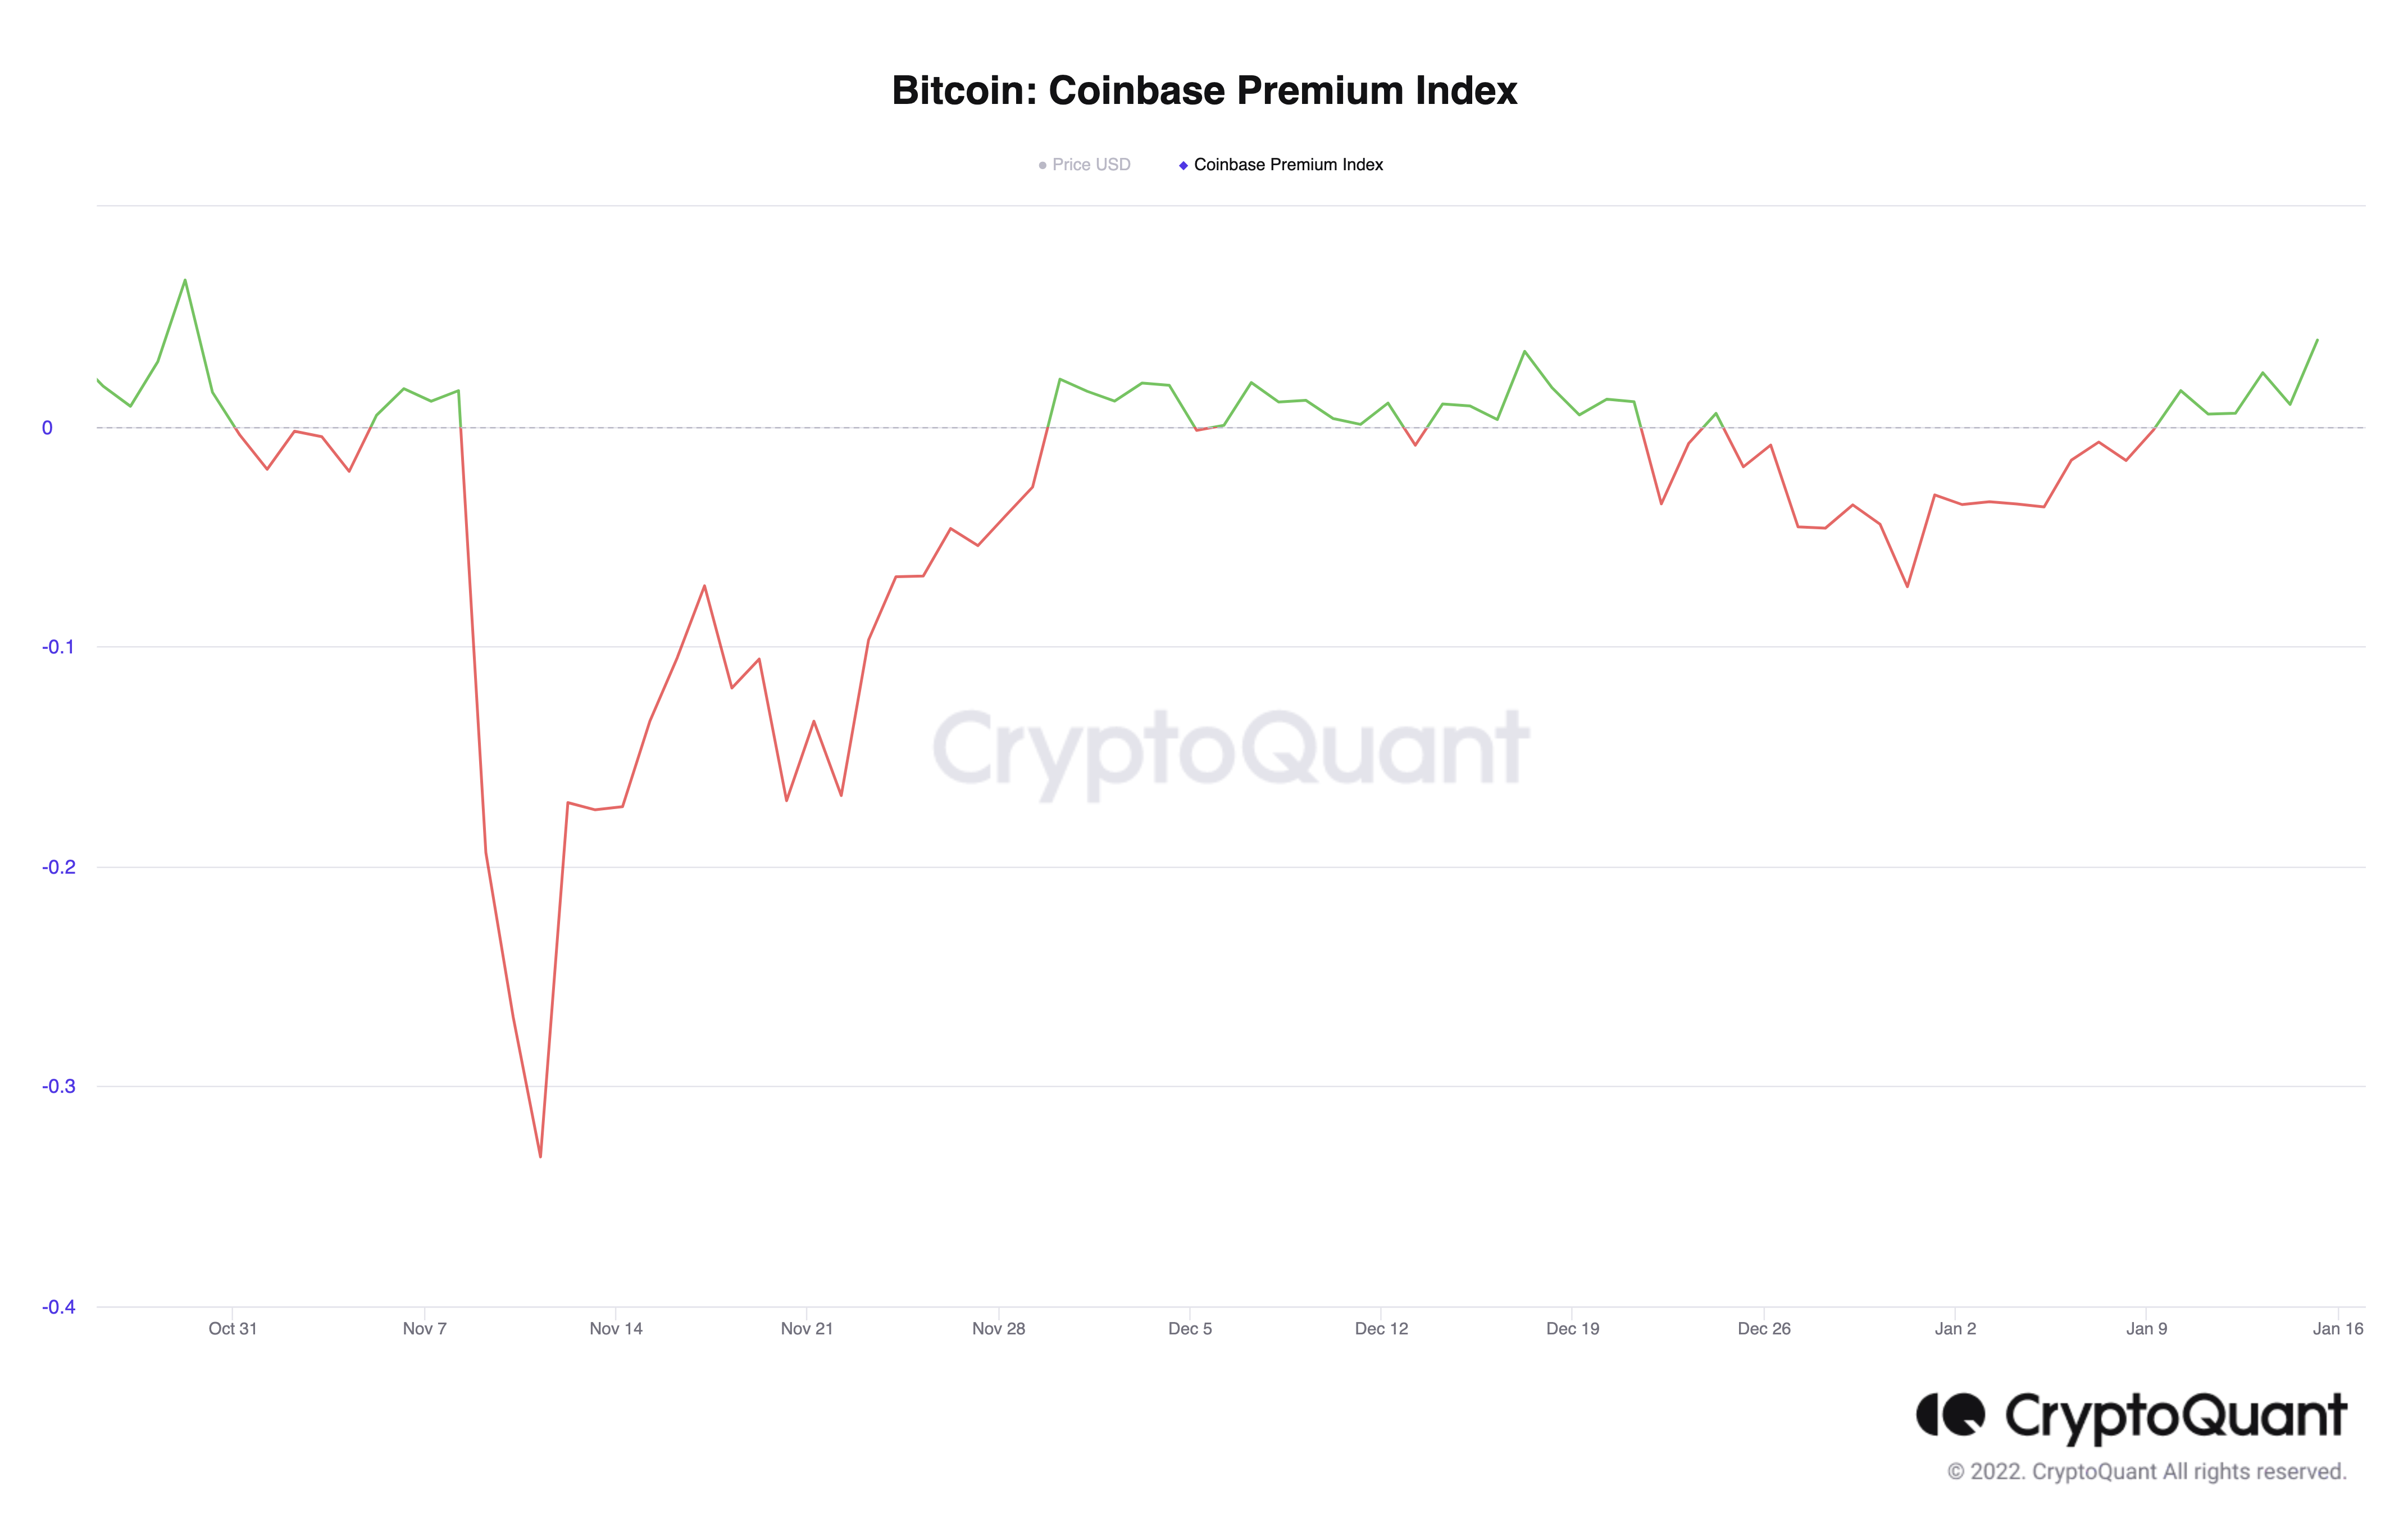 Buyers From Coinbase Powered Bitcoin Higher, or Did They?